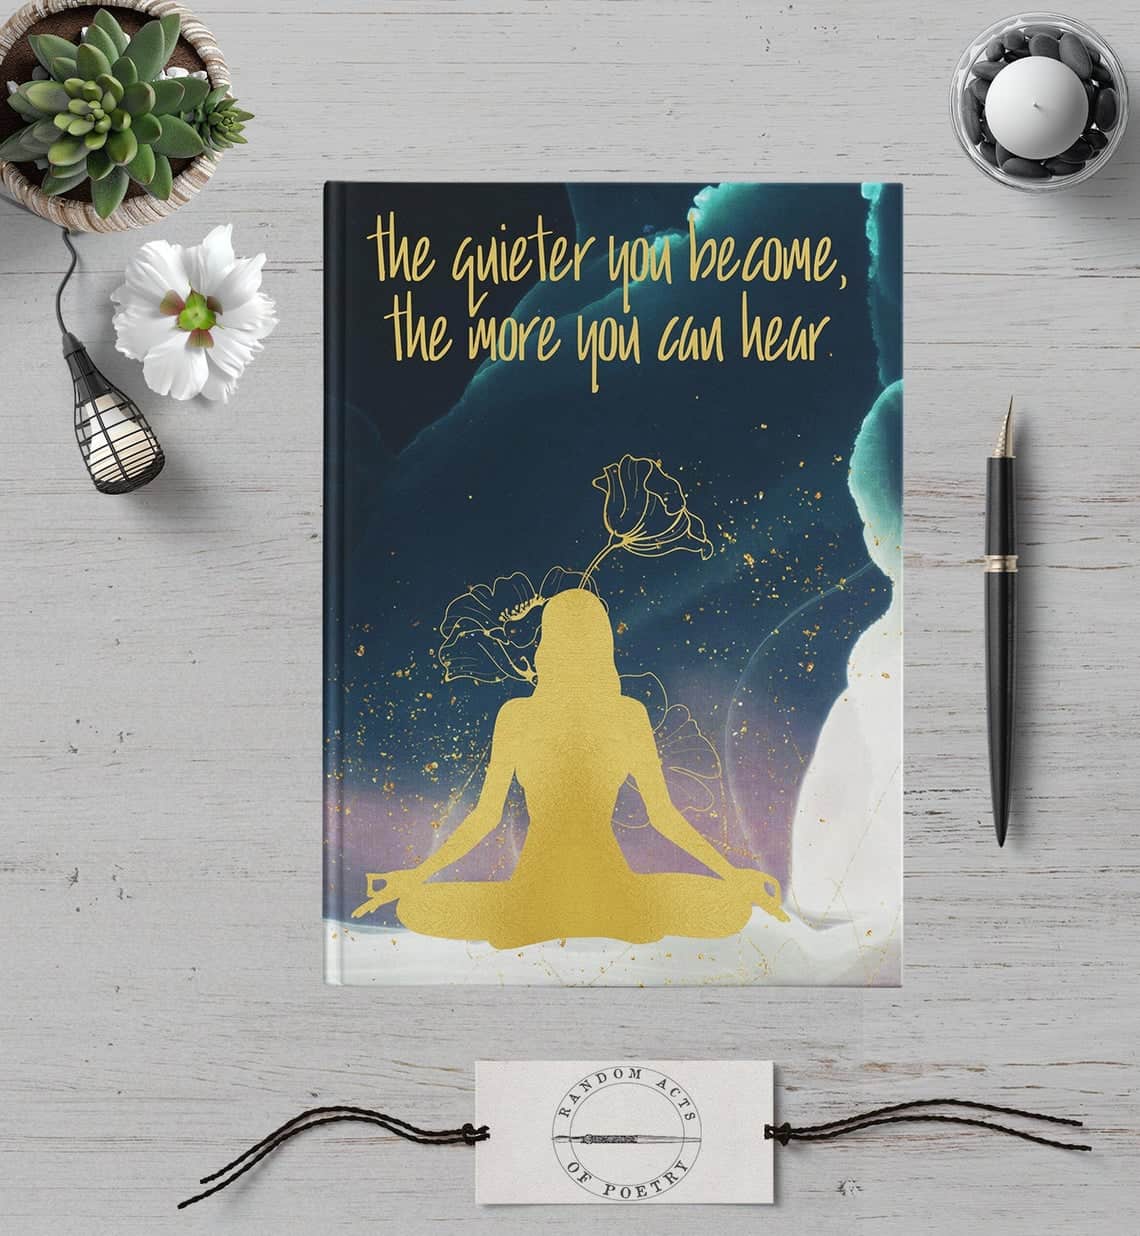 Mediation Journal, Yoga Journal, Quieter You Become More You Can Hear, Buddha Quote, Manifestation Notebook, Intention Journal, Spiritual